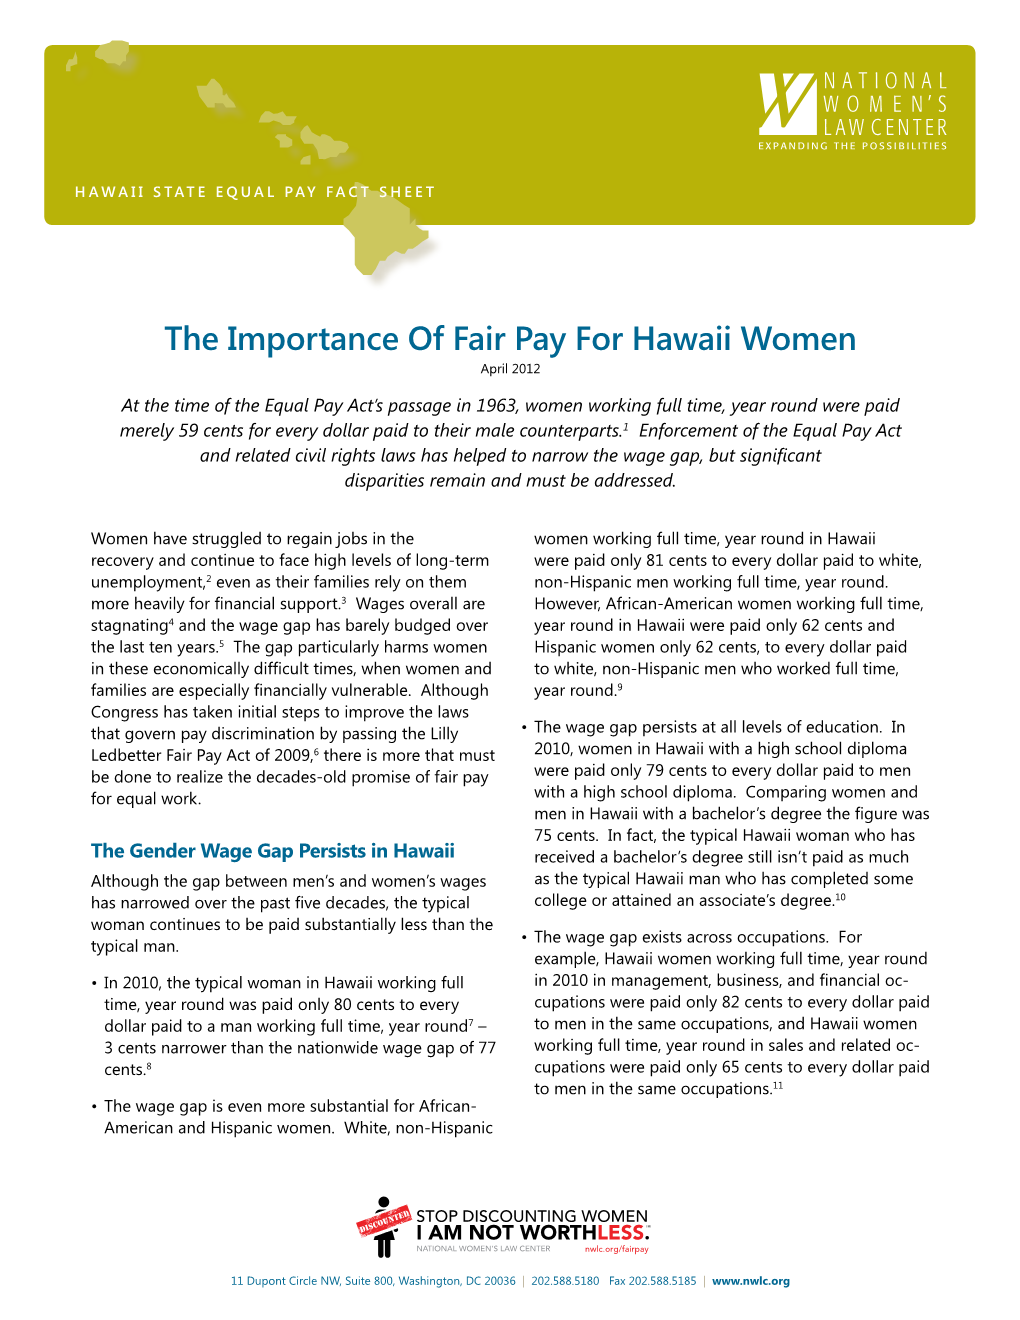 The Importance of Fair Pay for Hawaii Women April 2012